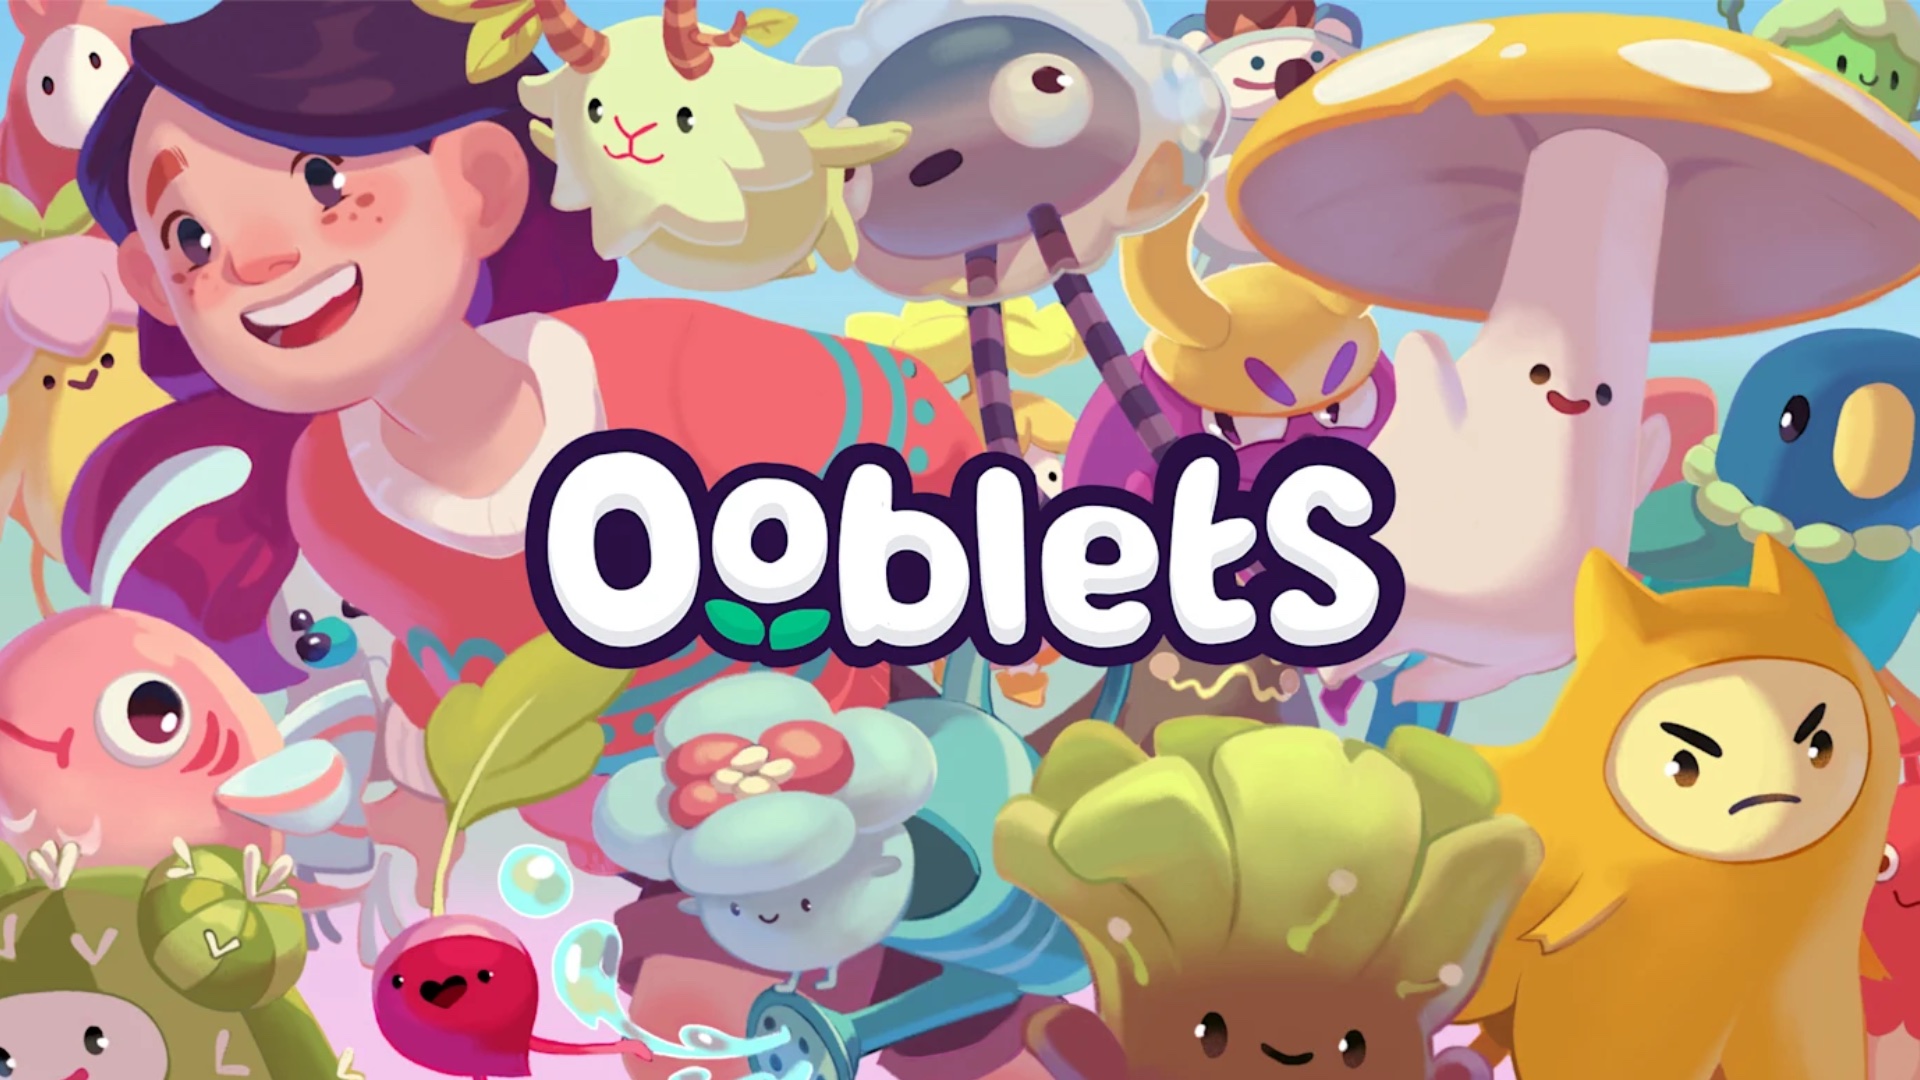 SwitchArcade Round-Up: Reviews Featuring ‘Ooblets’ and ‘Aquadine’, Plus the Latest Releases and Sales thumbnail